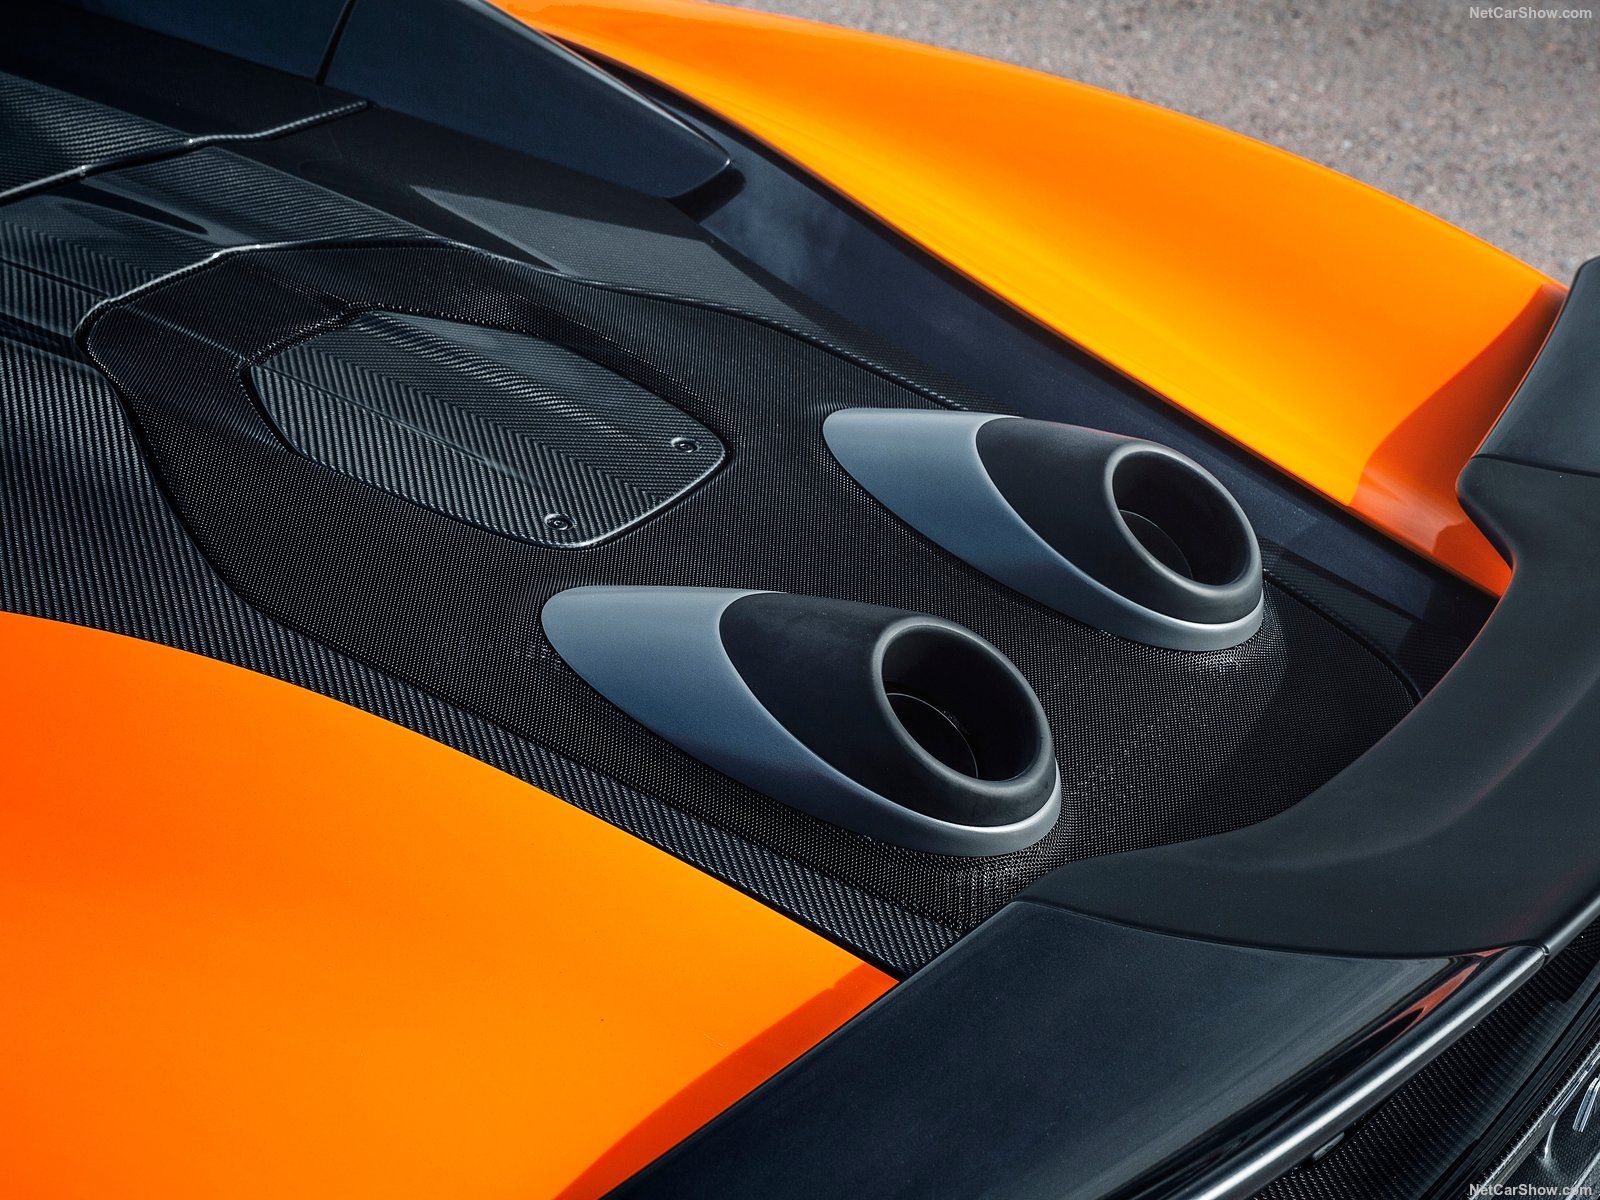 Top-Exit Exhausts Make Supercars So Better